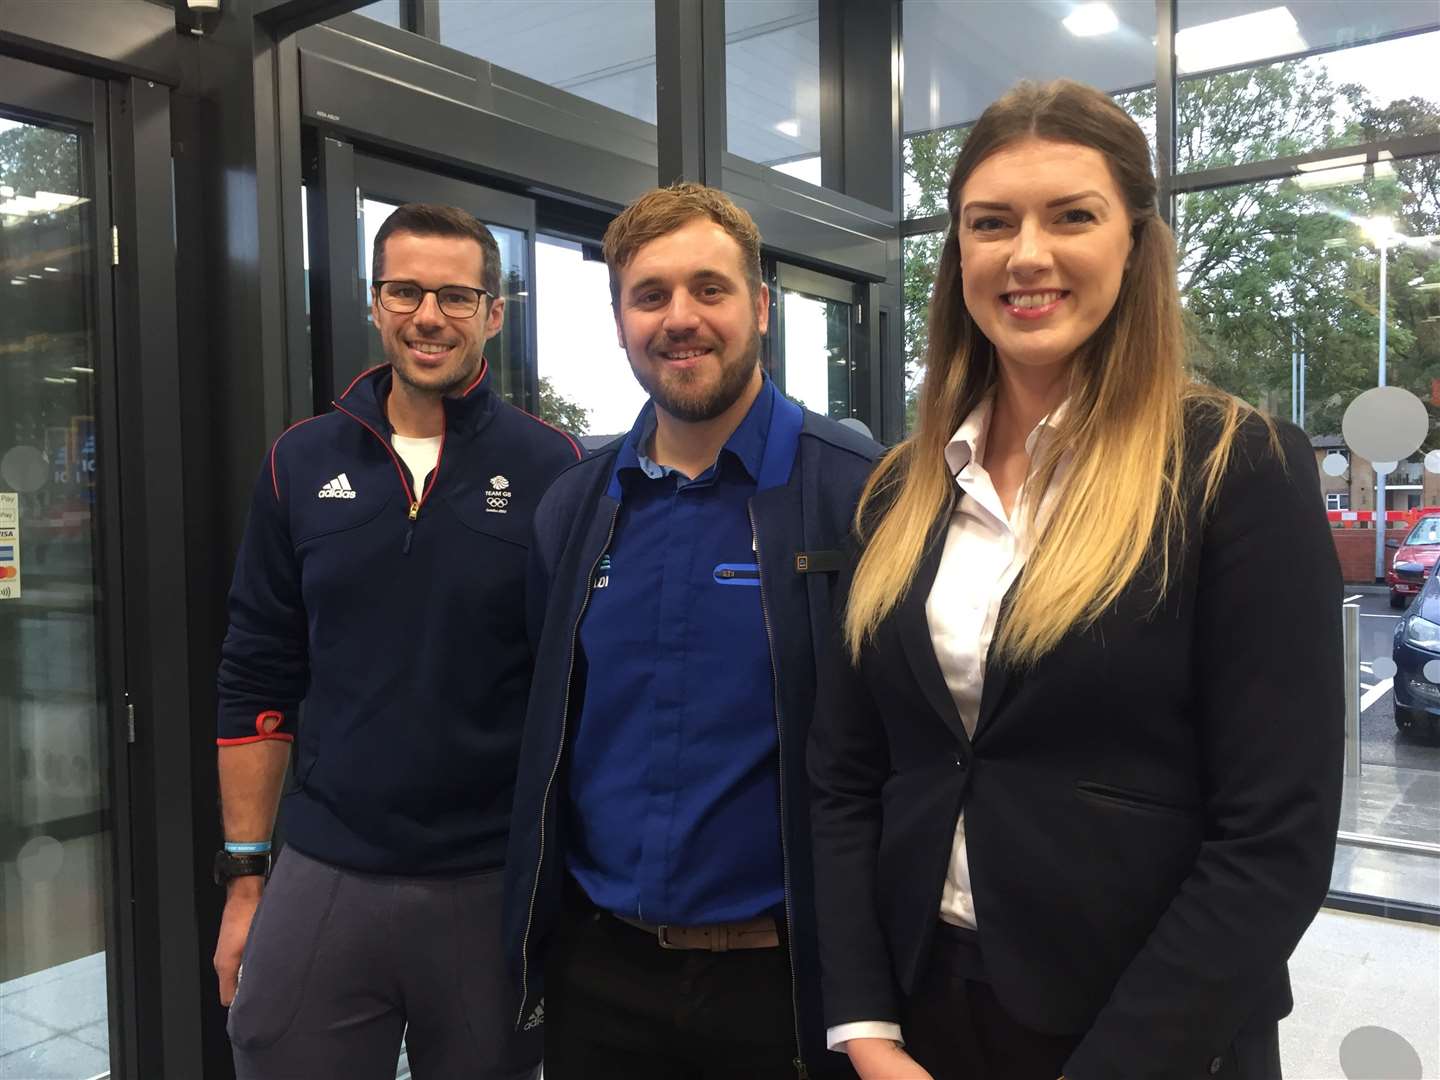 Olympic rower James Foad opened the Aldi in Hythe last month. He is pictured with Calum Morrison, store manager and Eve Grant, area manager